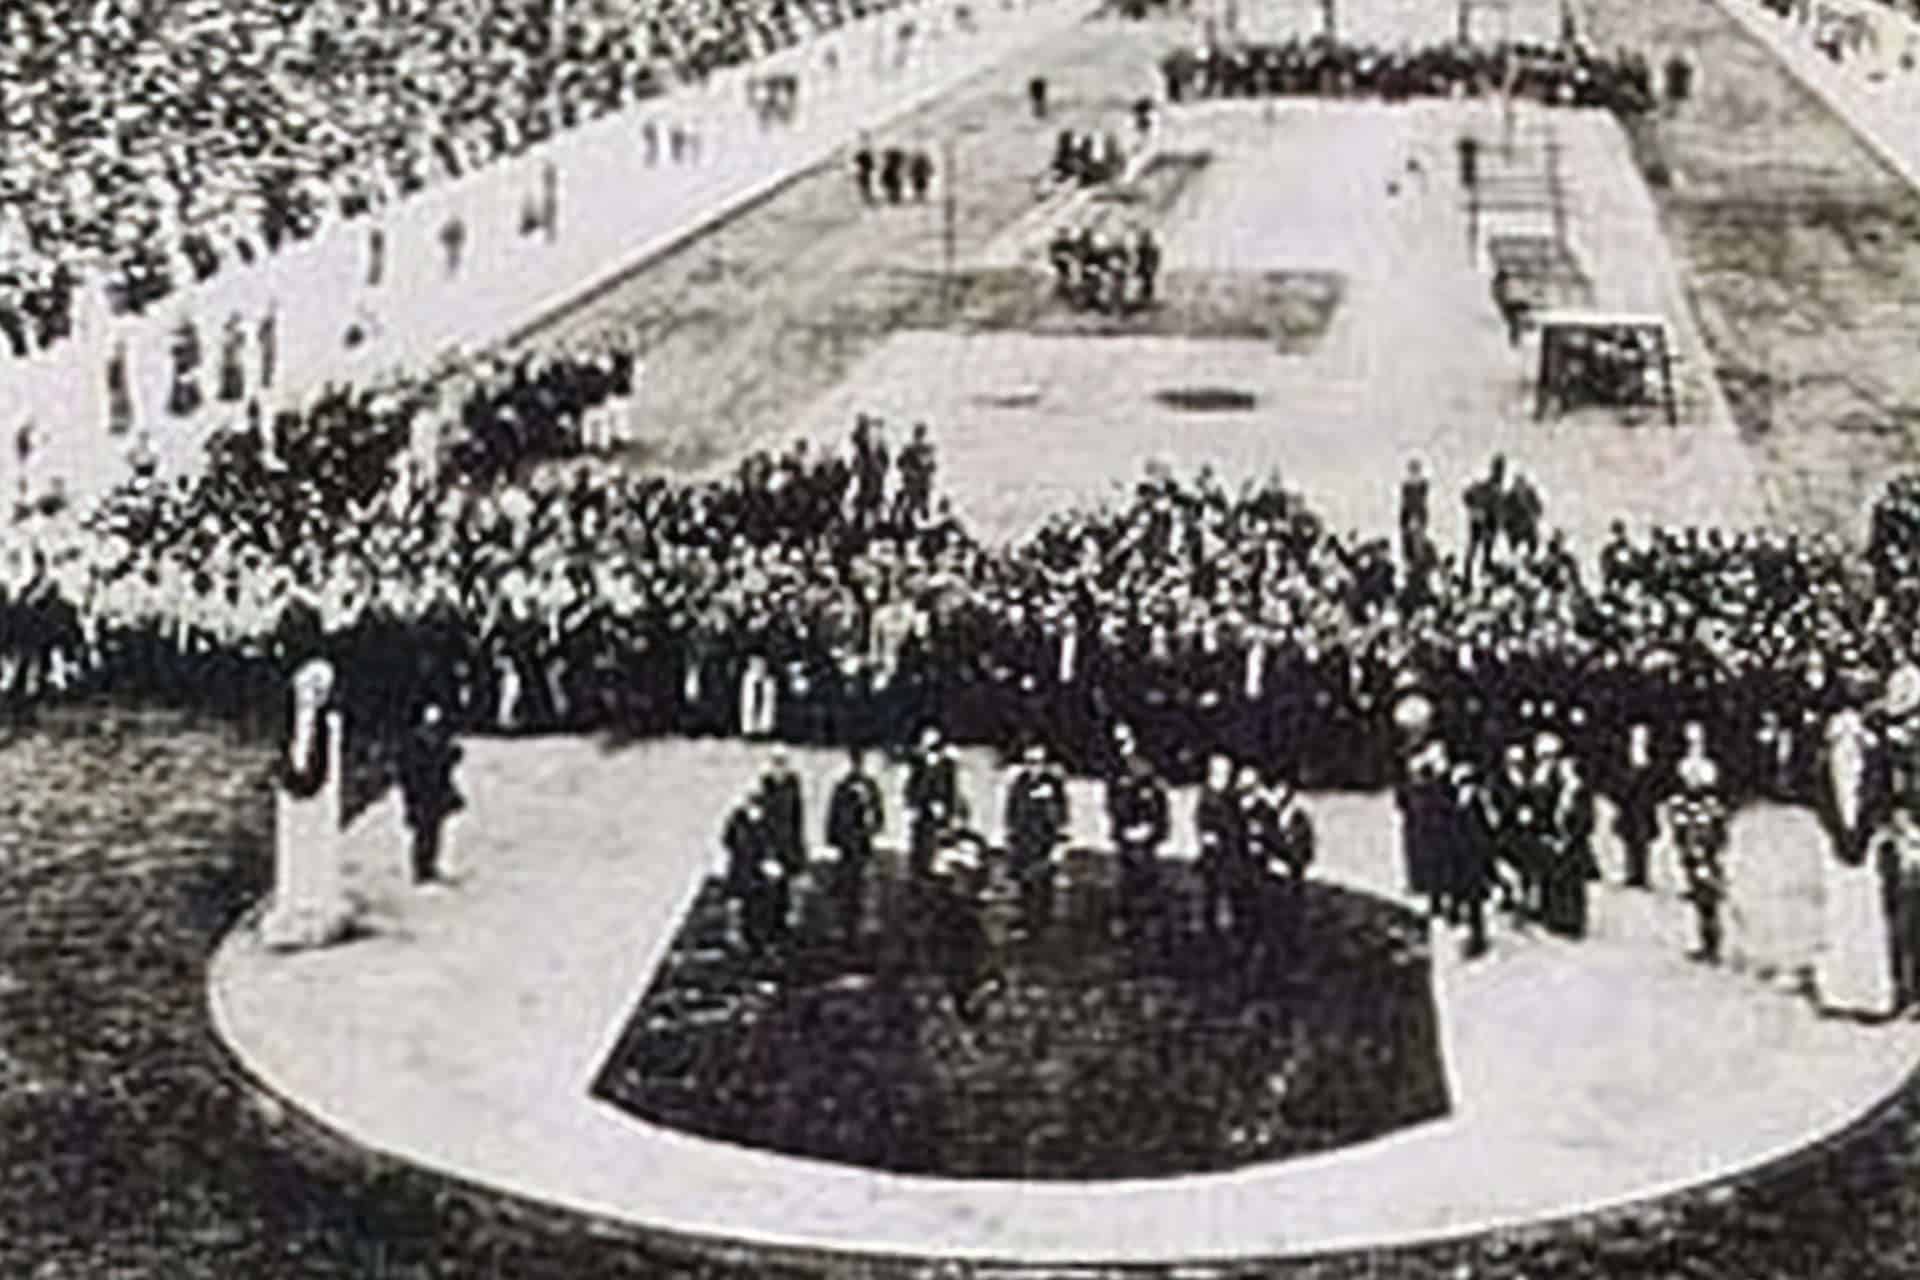 A History of Opening Ceremony